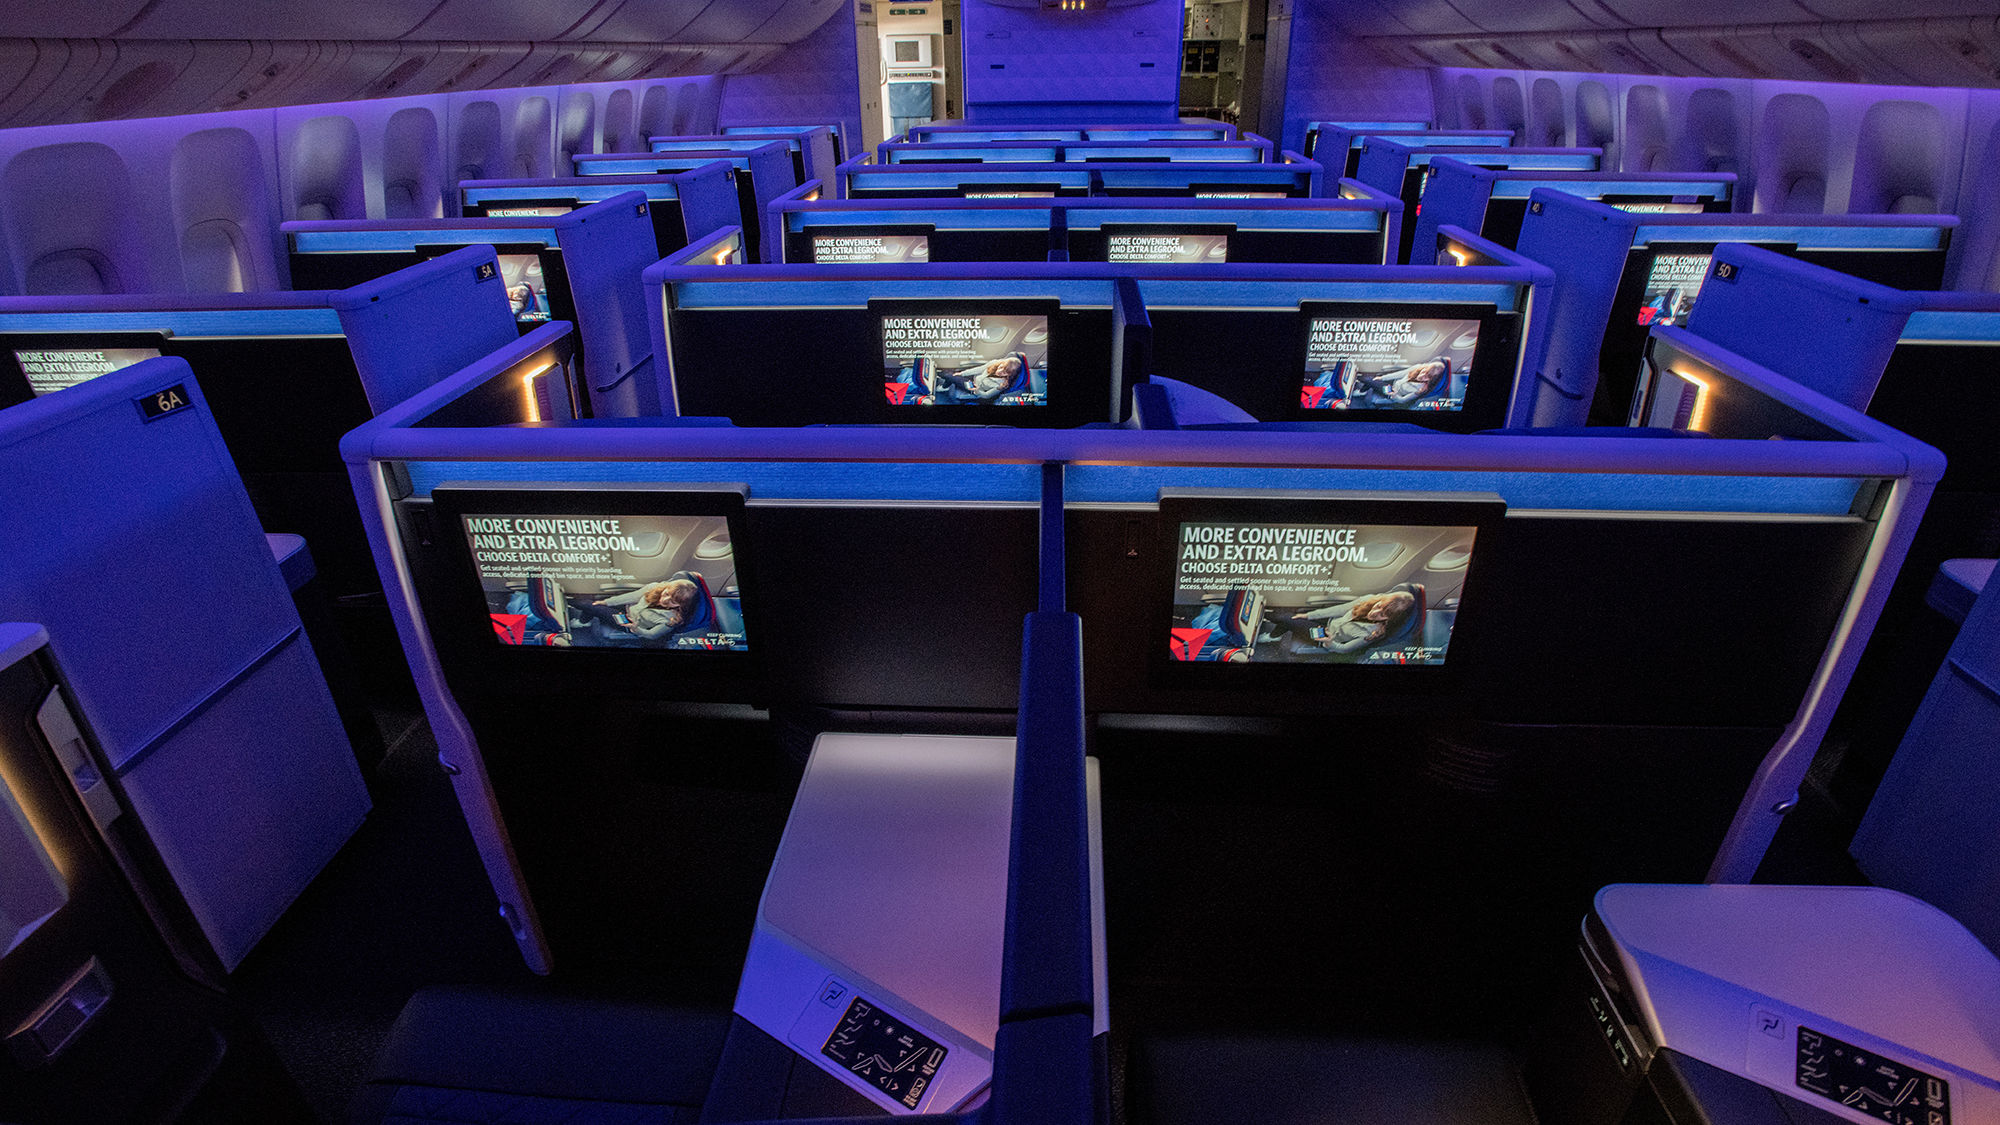 Delta's first retrofiited Boeing 777 enters service: Travel Weekly